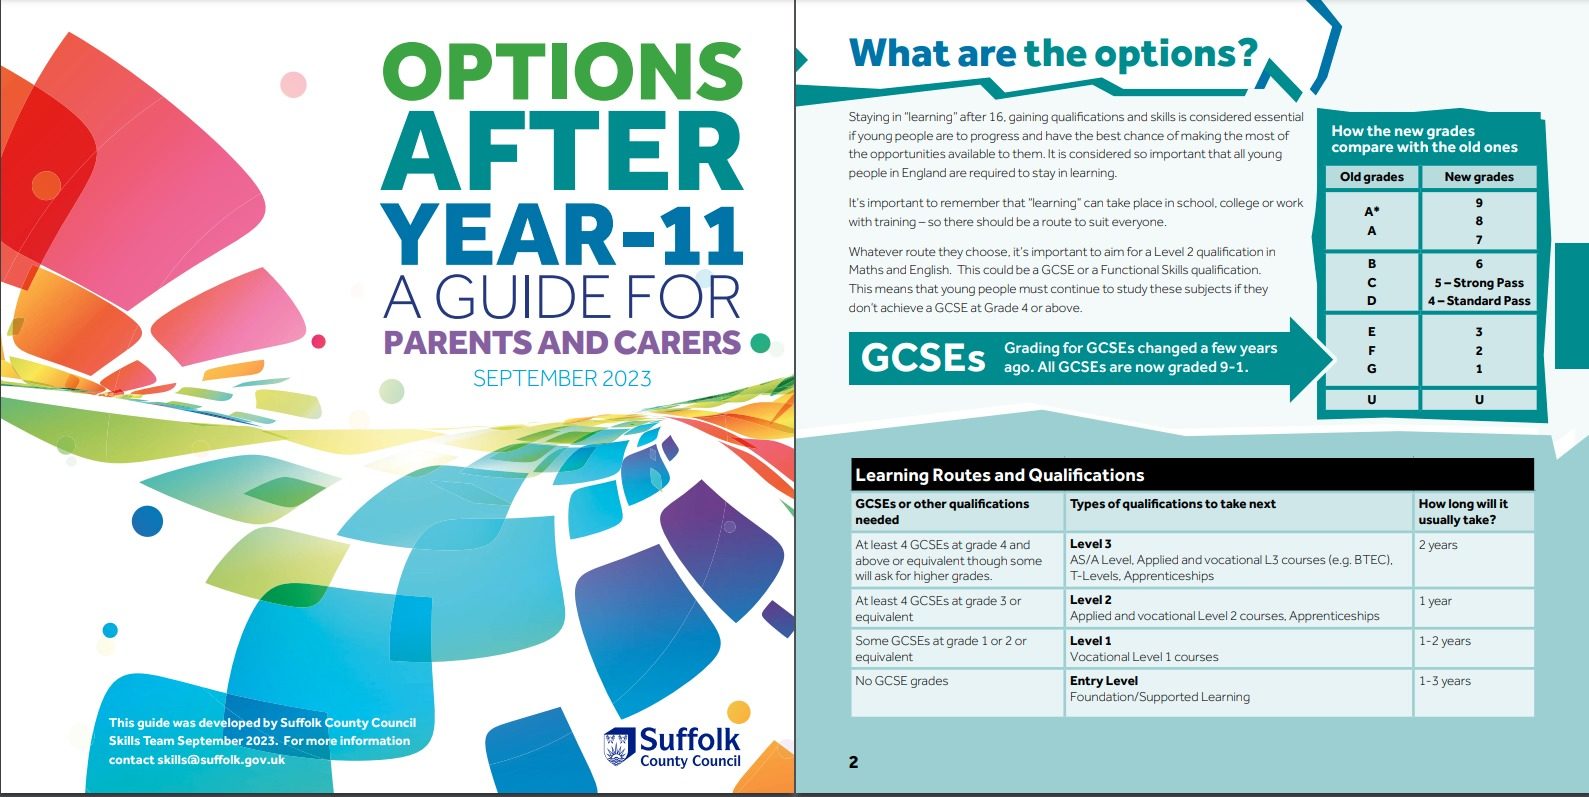 Options after Year 11 Guide 2023 [1] (SCC)